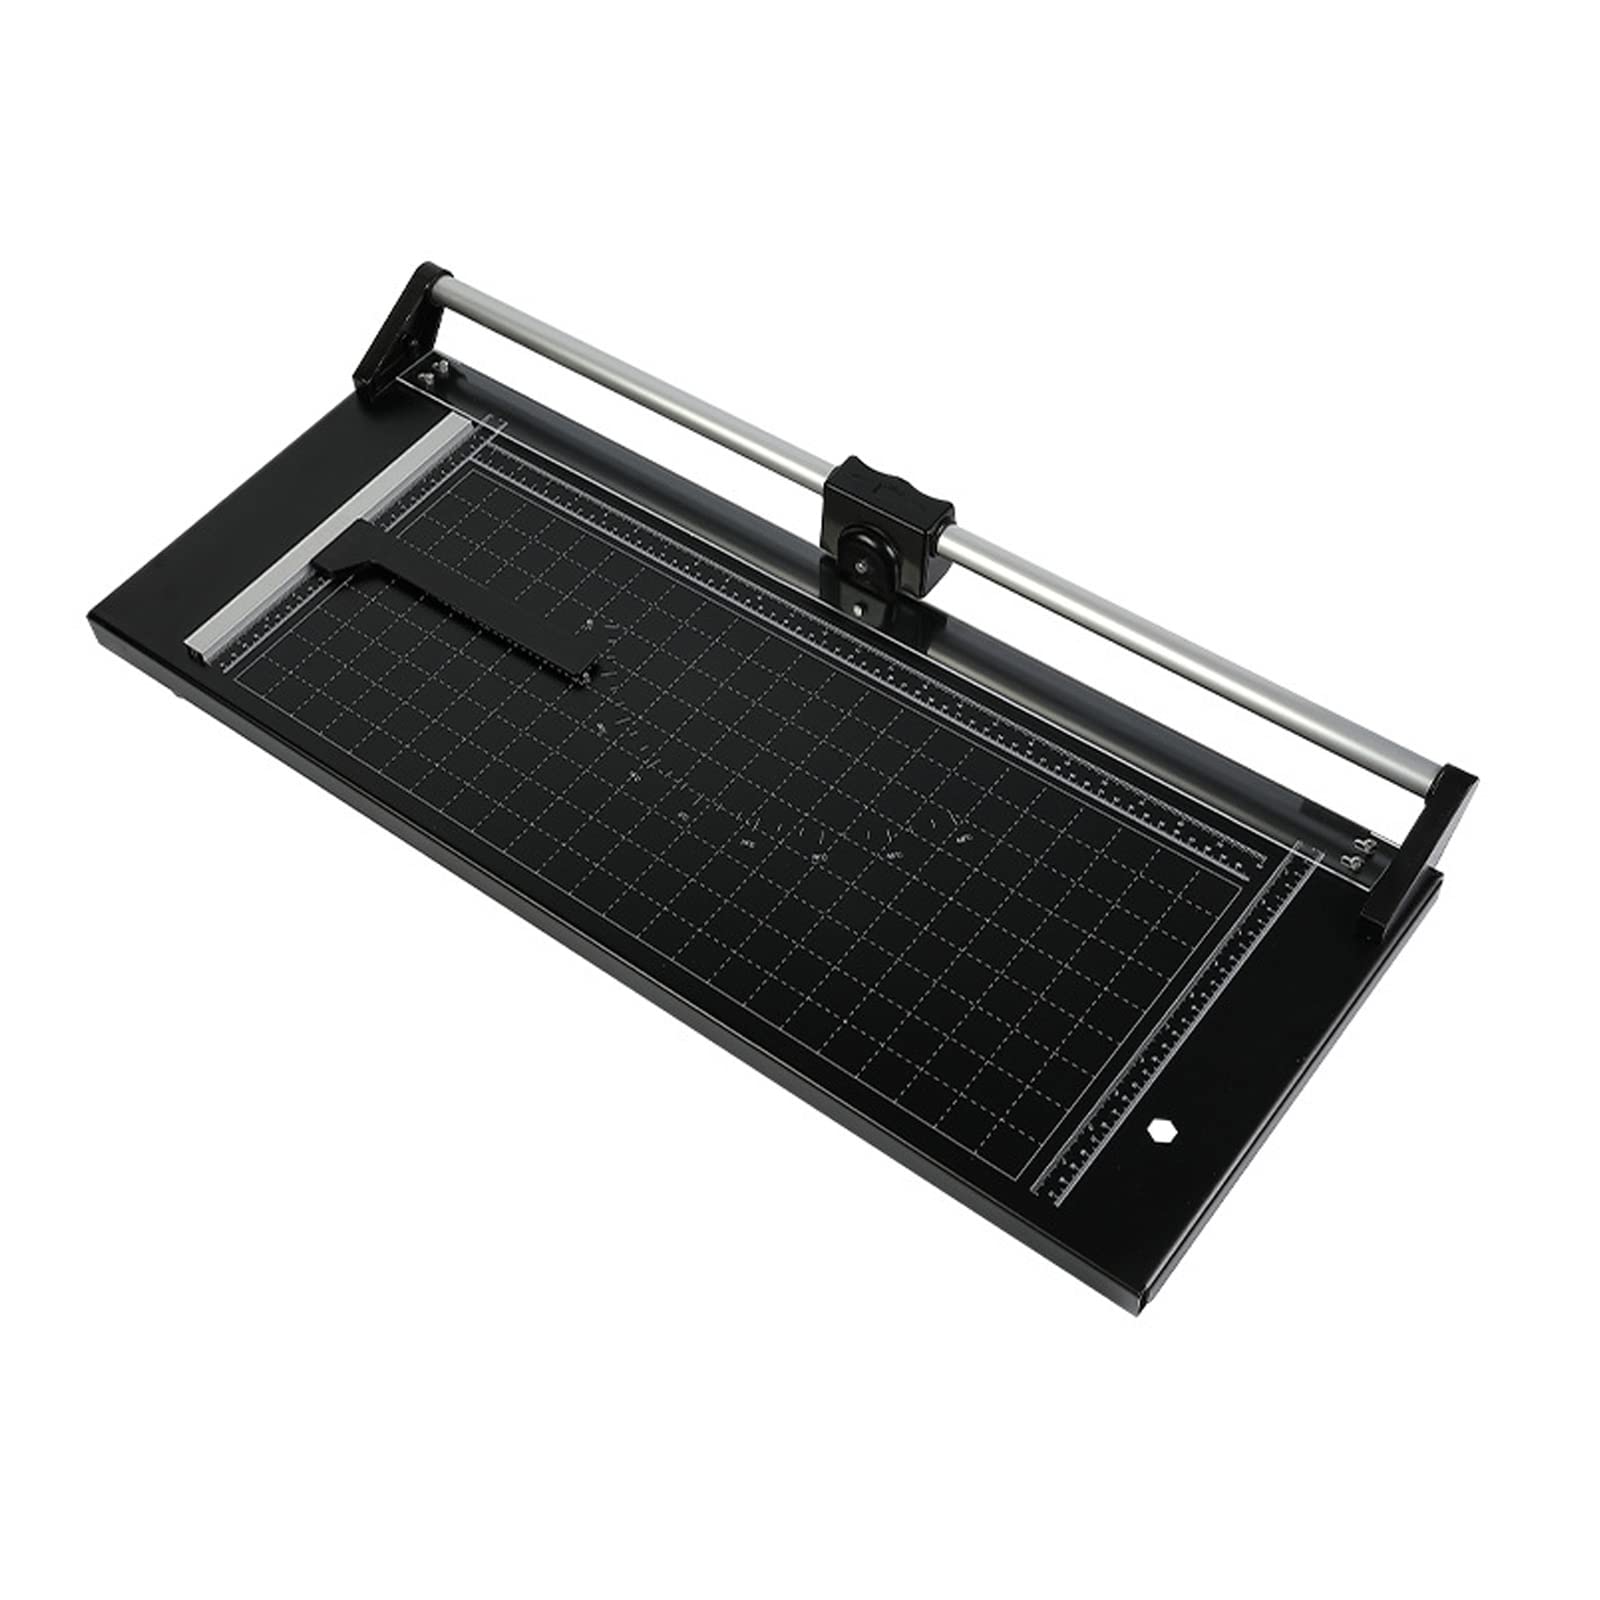 24 Inch Paper Cutter, Manual Precision Rotary Paper Trimmer, Sharp Photo Paper Cutter, Rotary Paper Cutter Trimmer